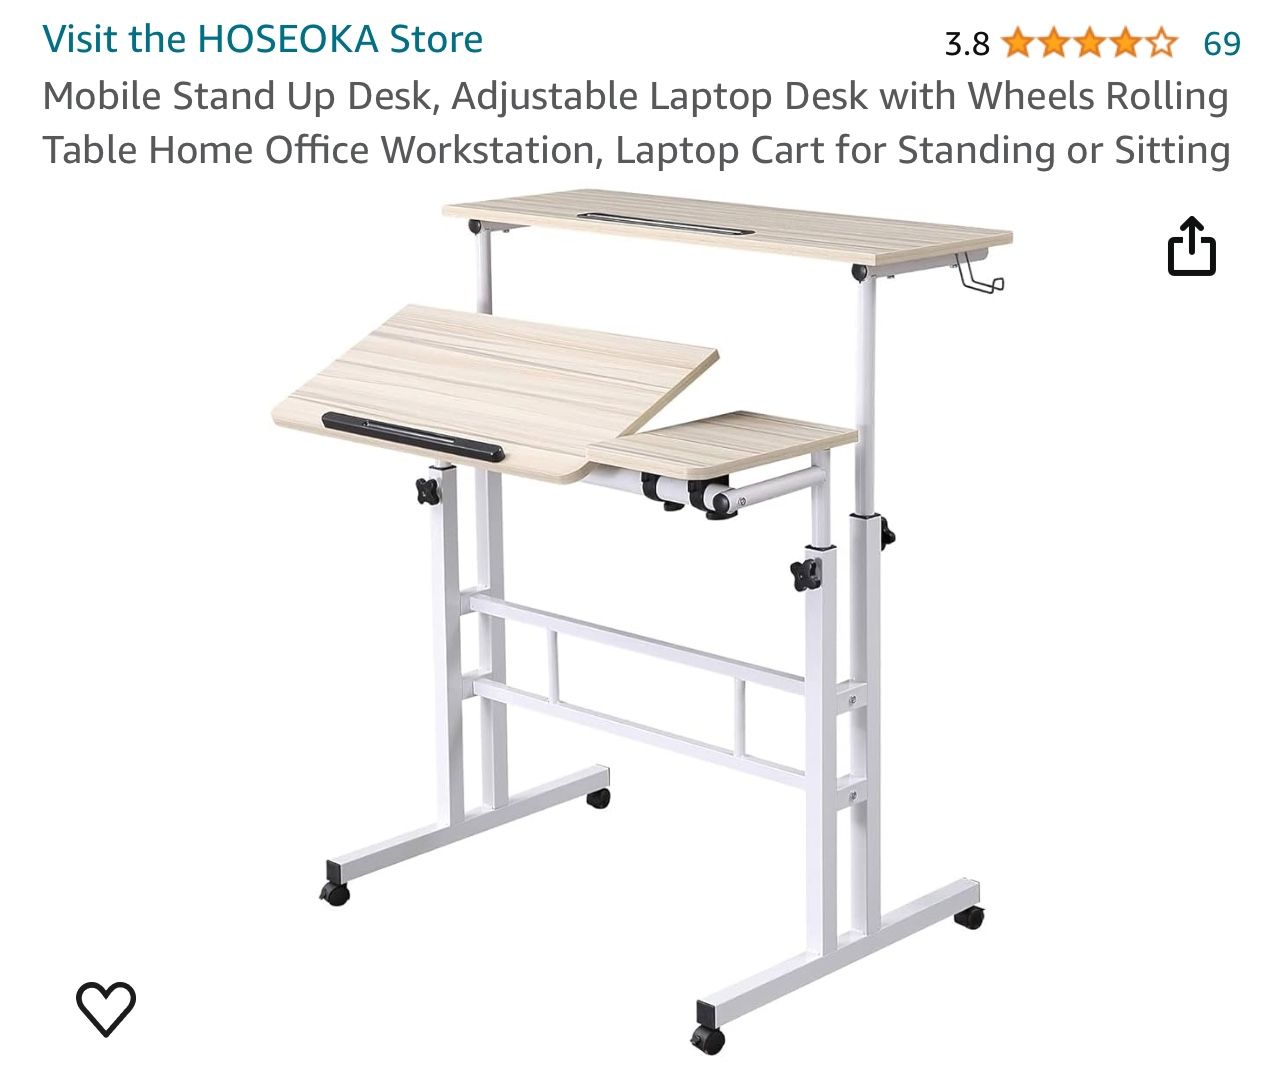 Stand Up Desk $30